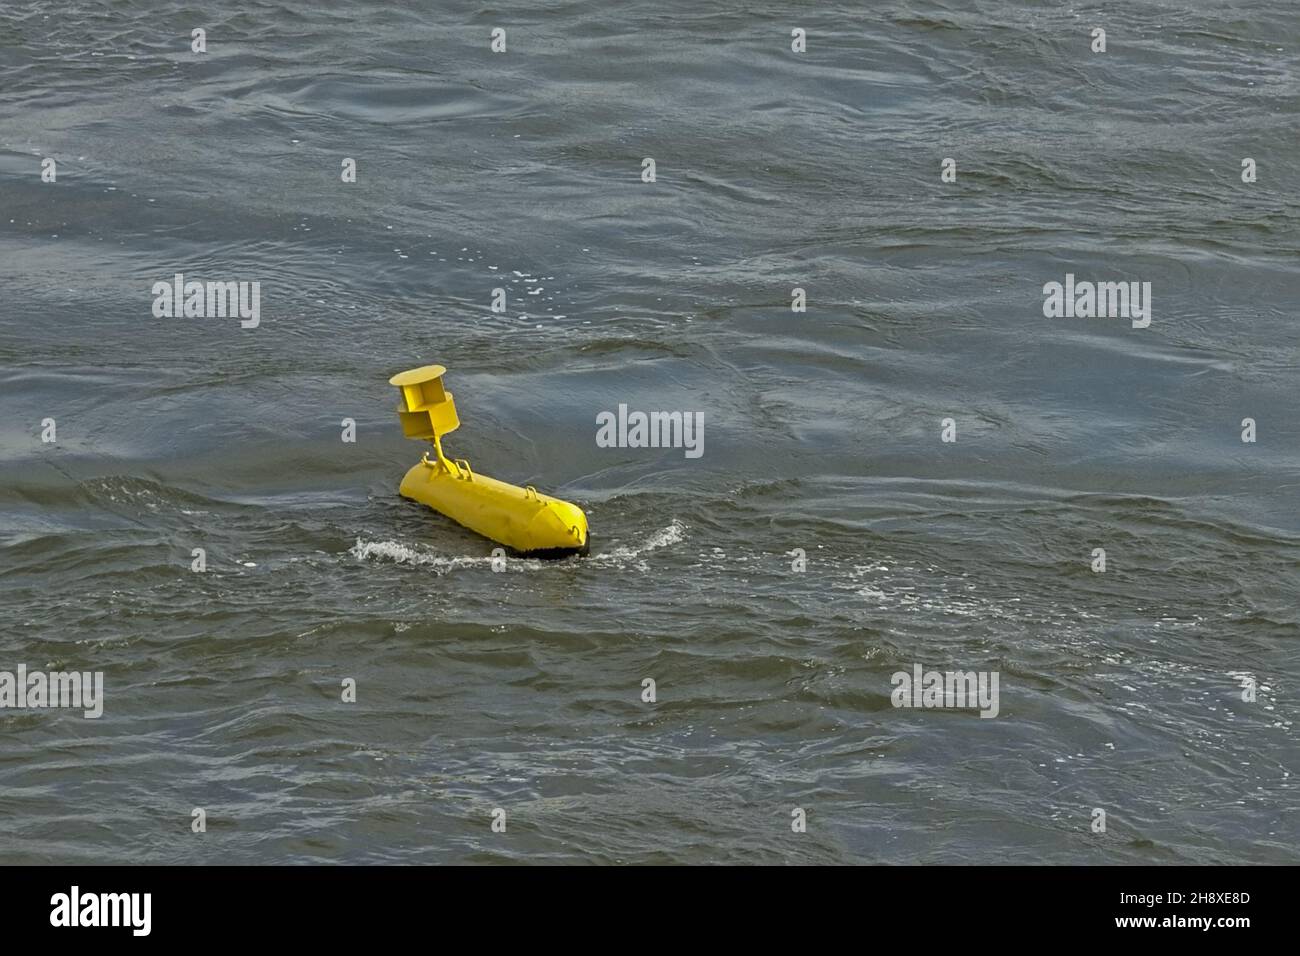 Yellow measurement buoy in the water Stock Photo